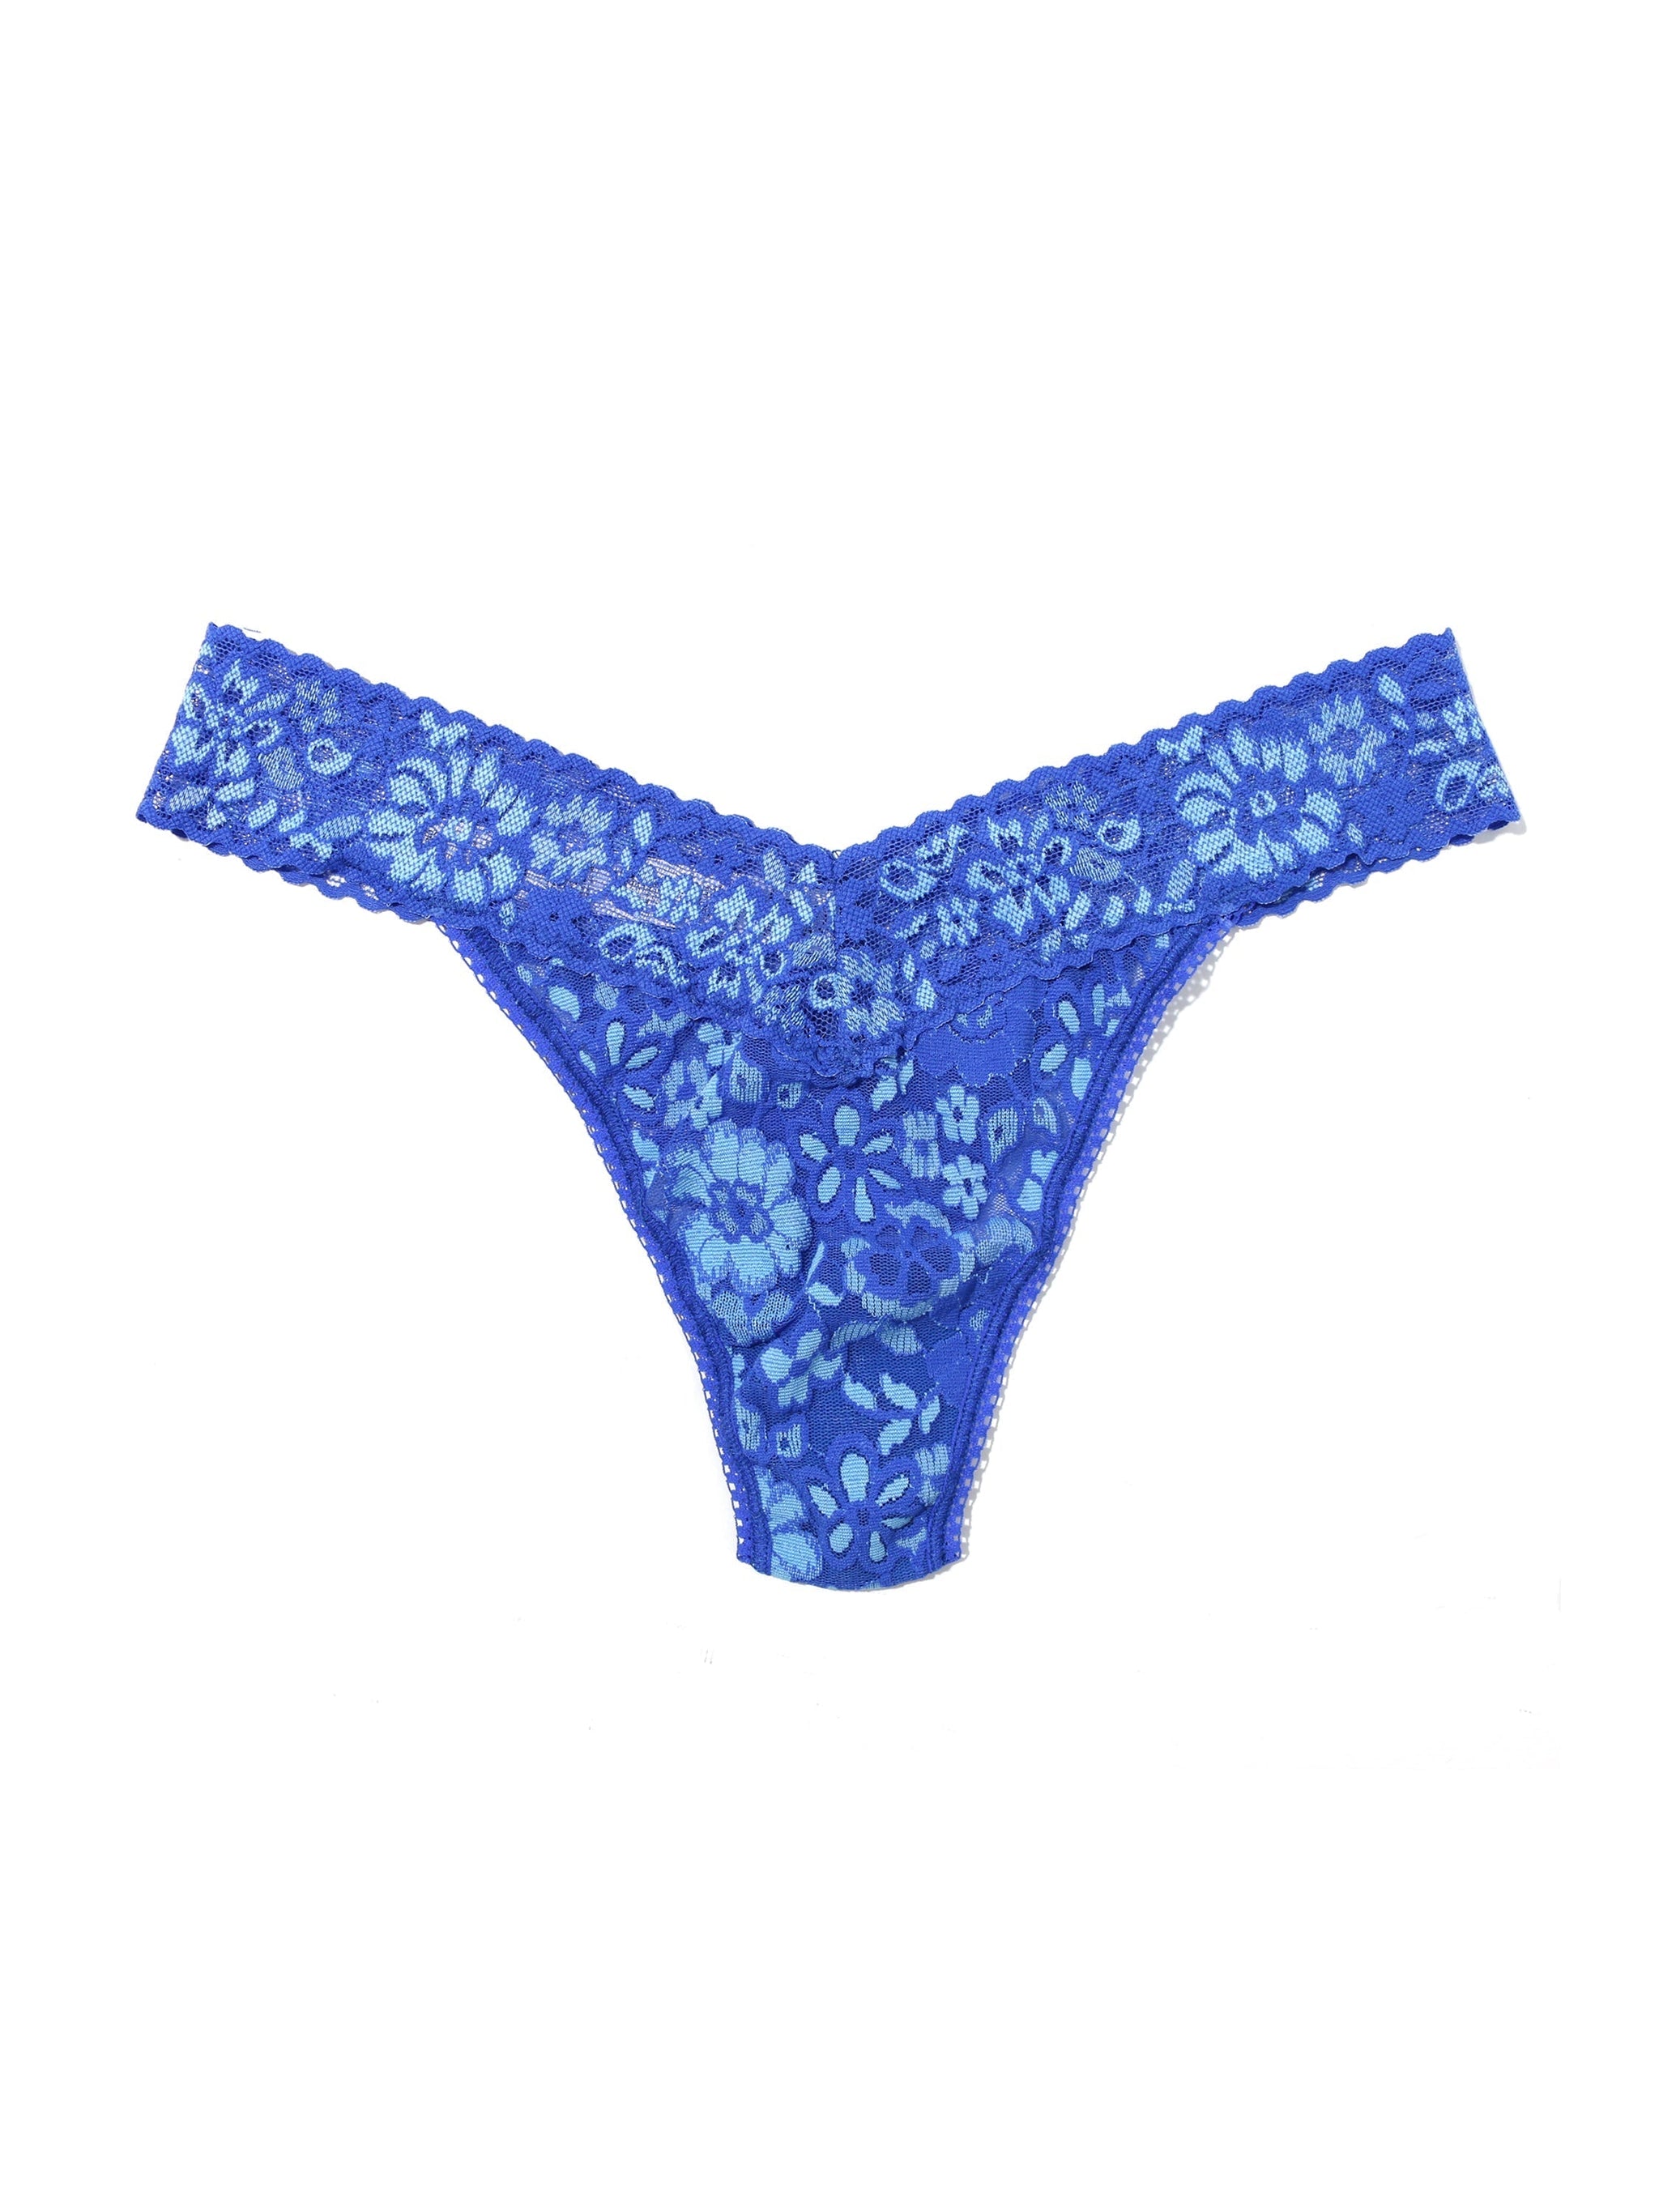 Daily Lace™ Cross-dye Original Rise Thong Bring Blueberries Blue